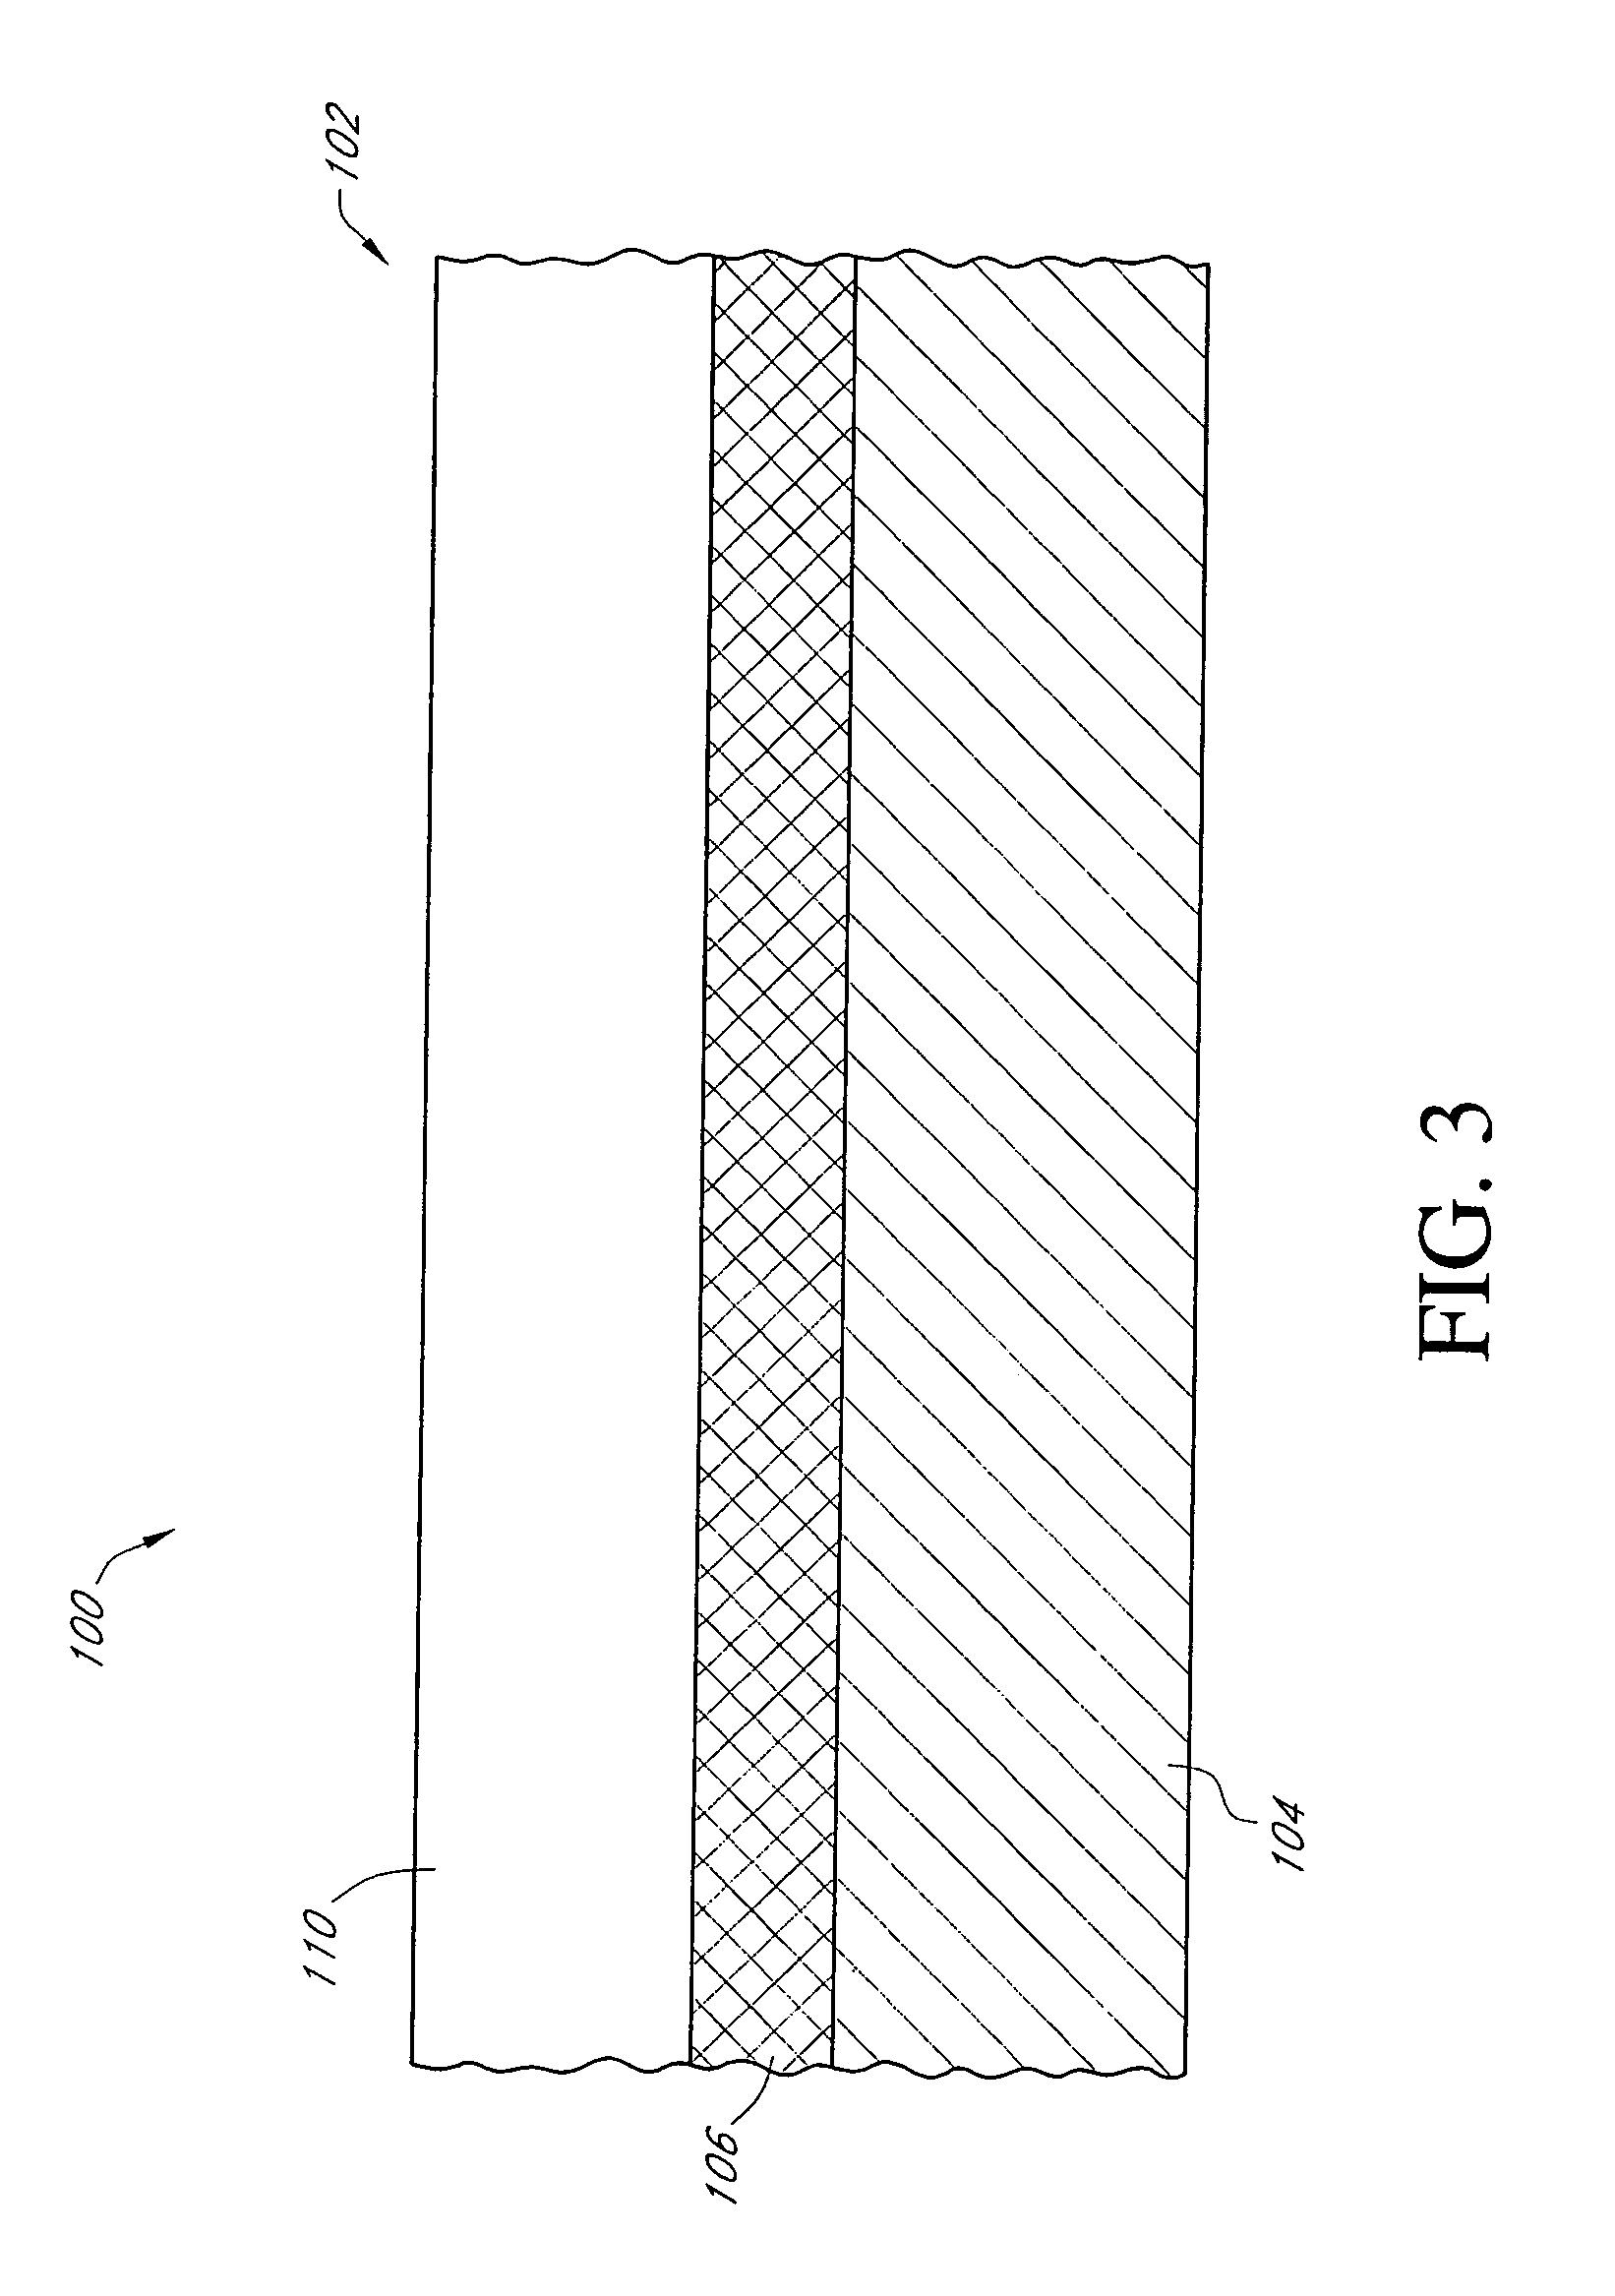 FinFET device with reduced DIBL